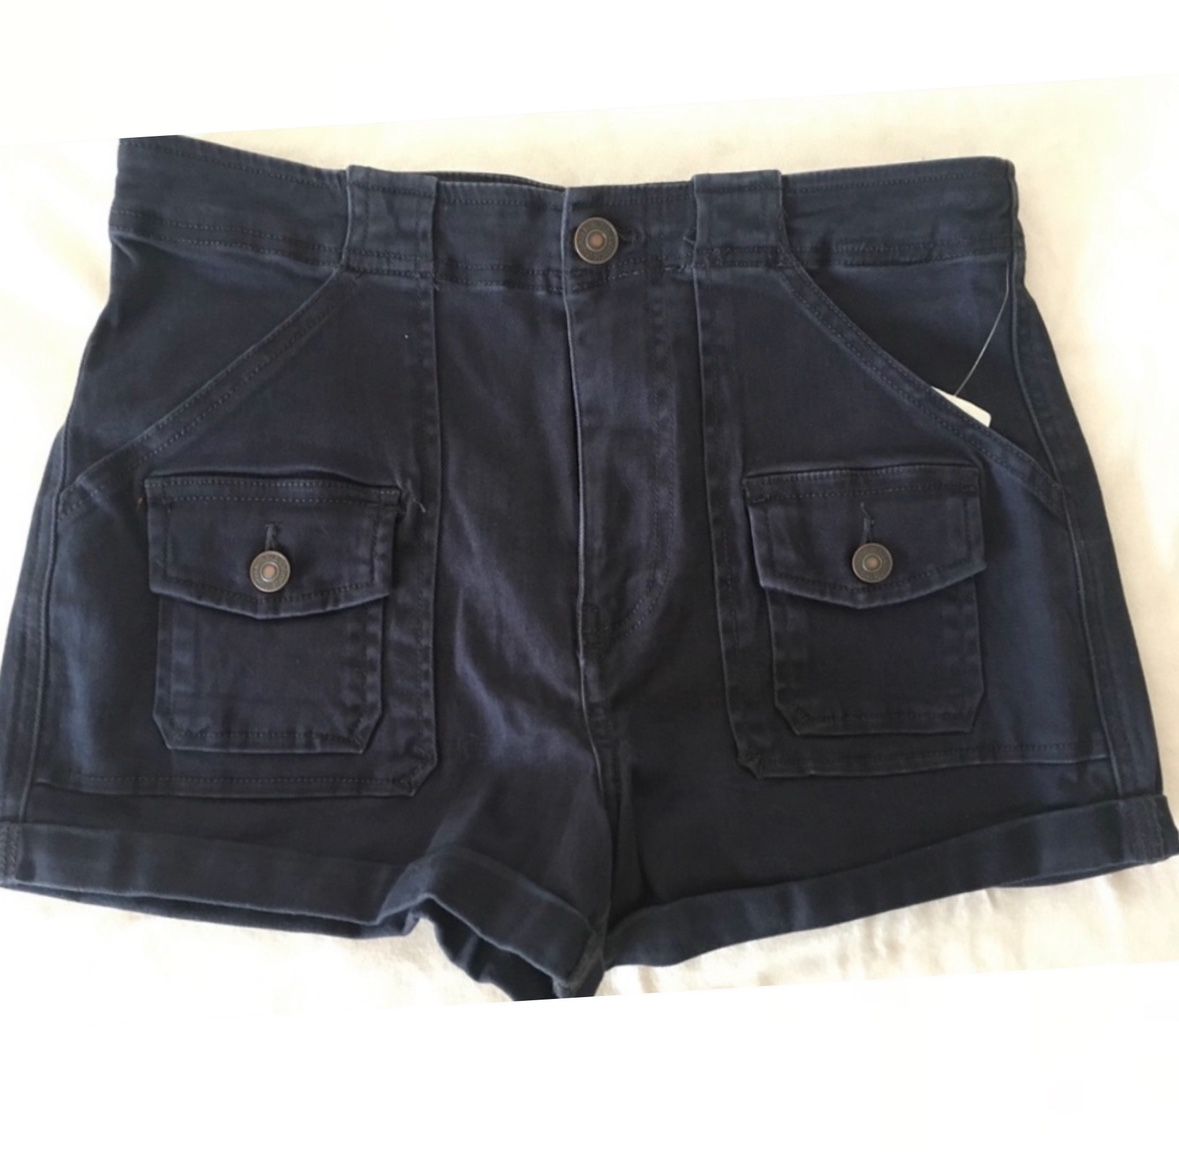 New Junior Women’s Size 00 High Waisted Abercrombie & Fitch Navy Blue Shorts